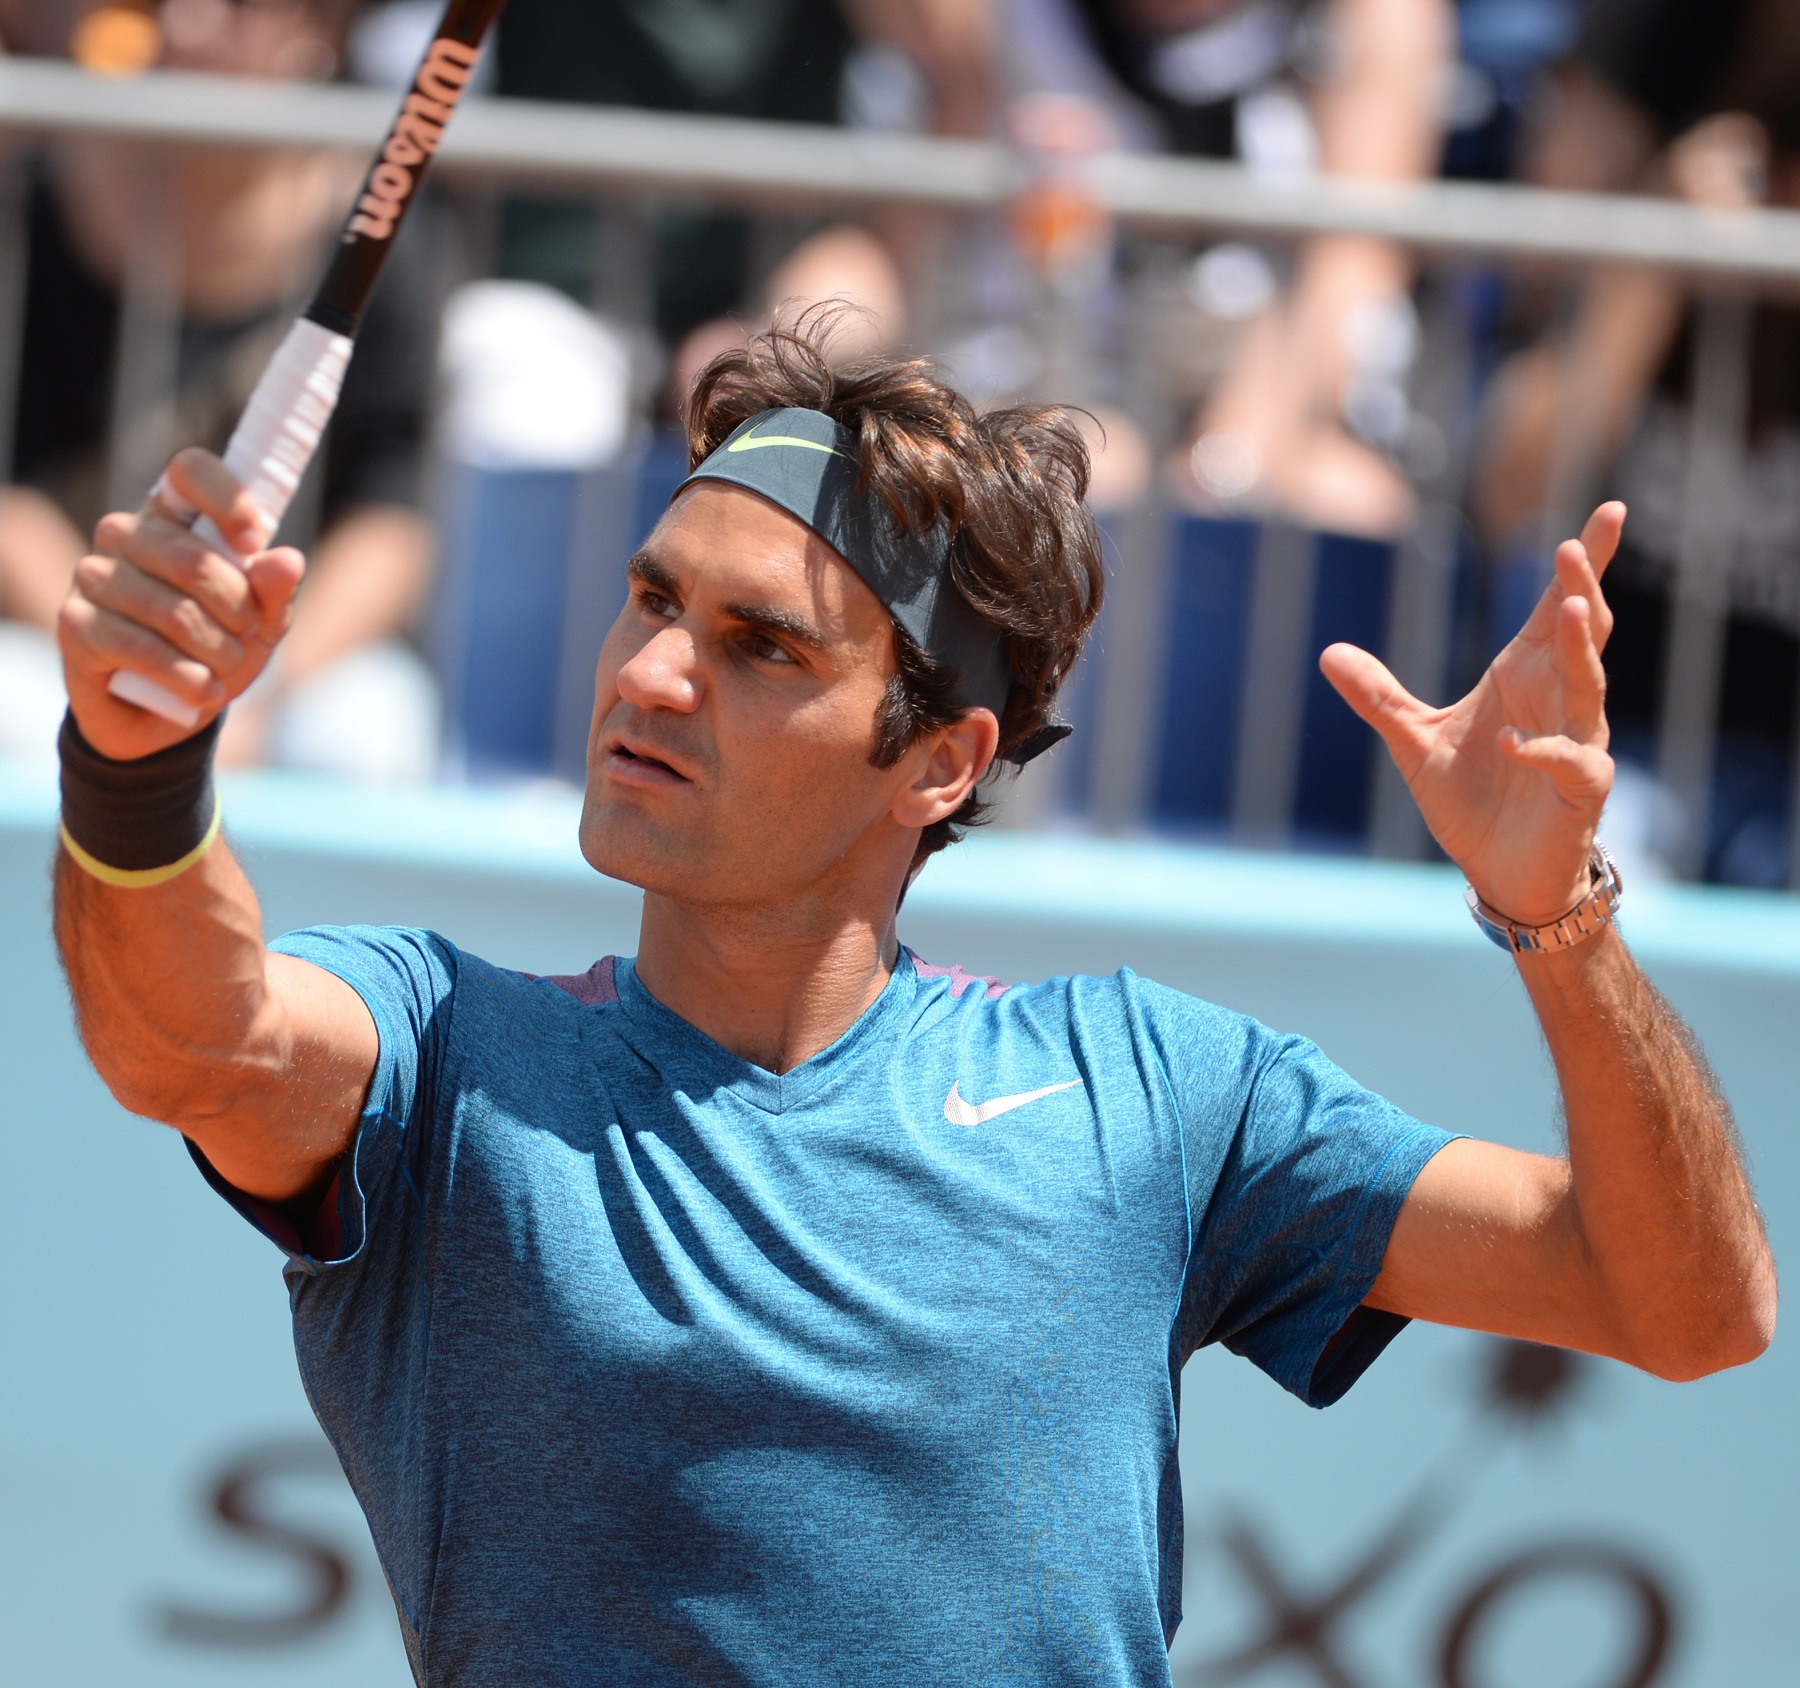 UPDATE 1-Tennis-Leg injury forces Federer out of Rome quarters